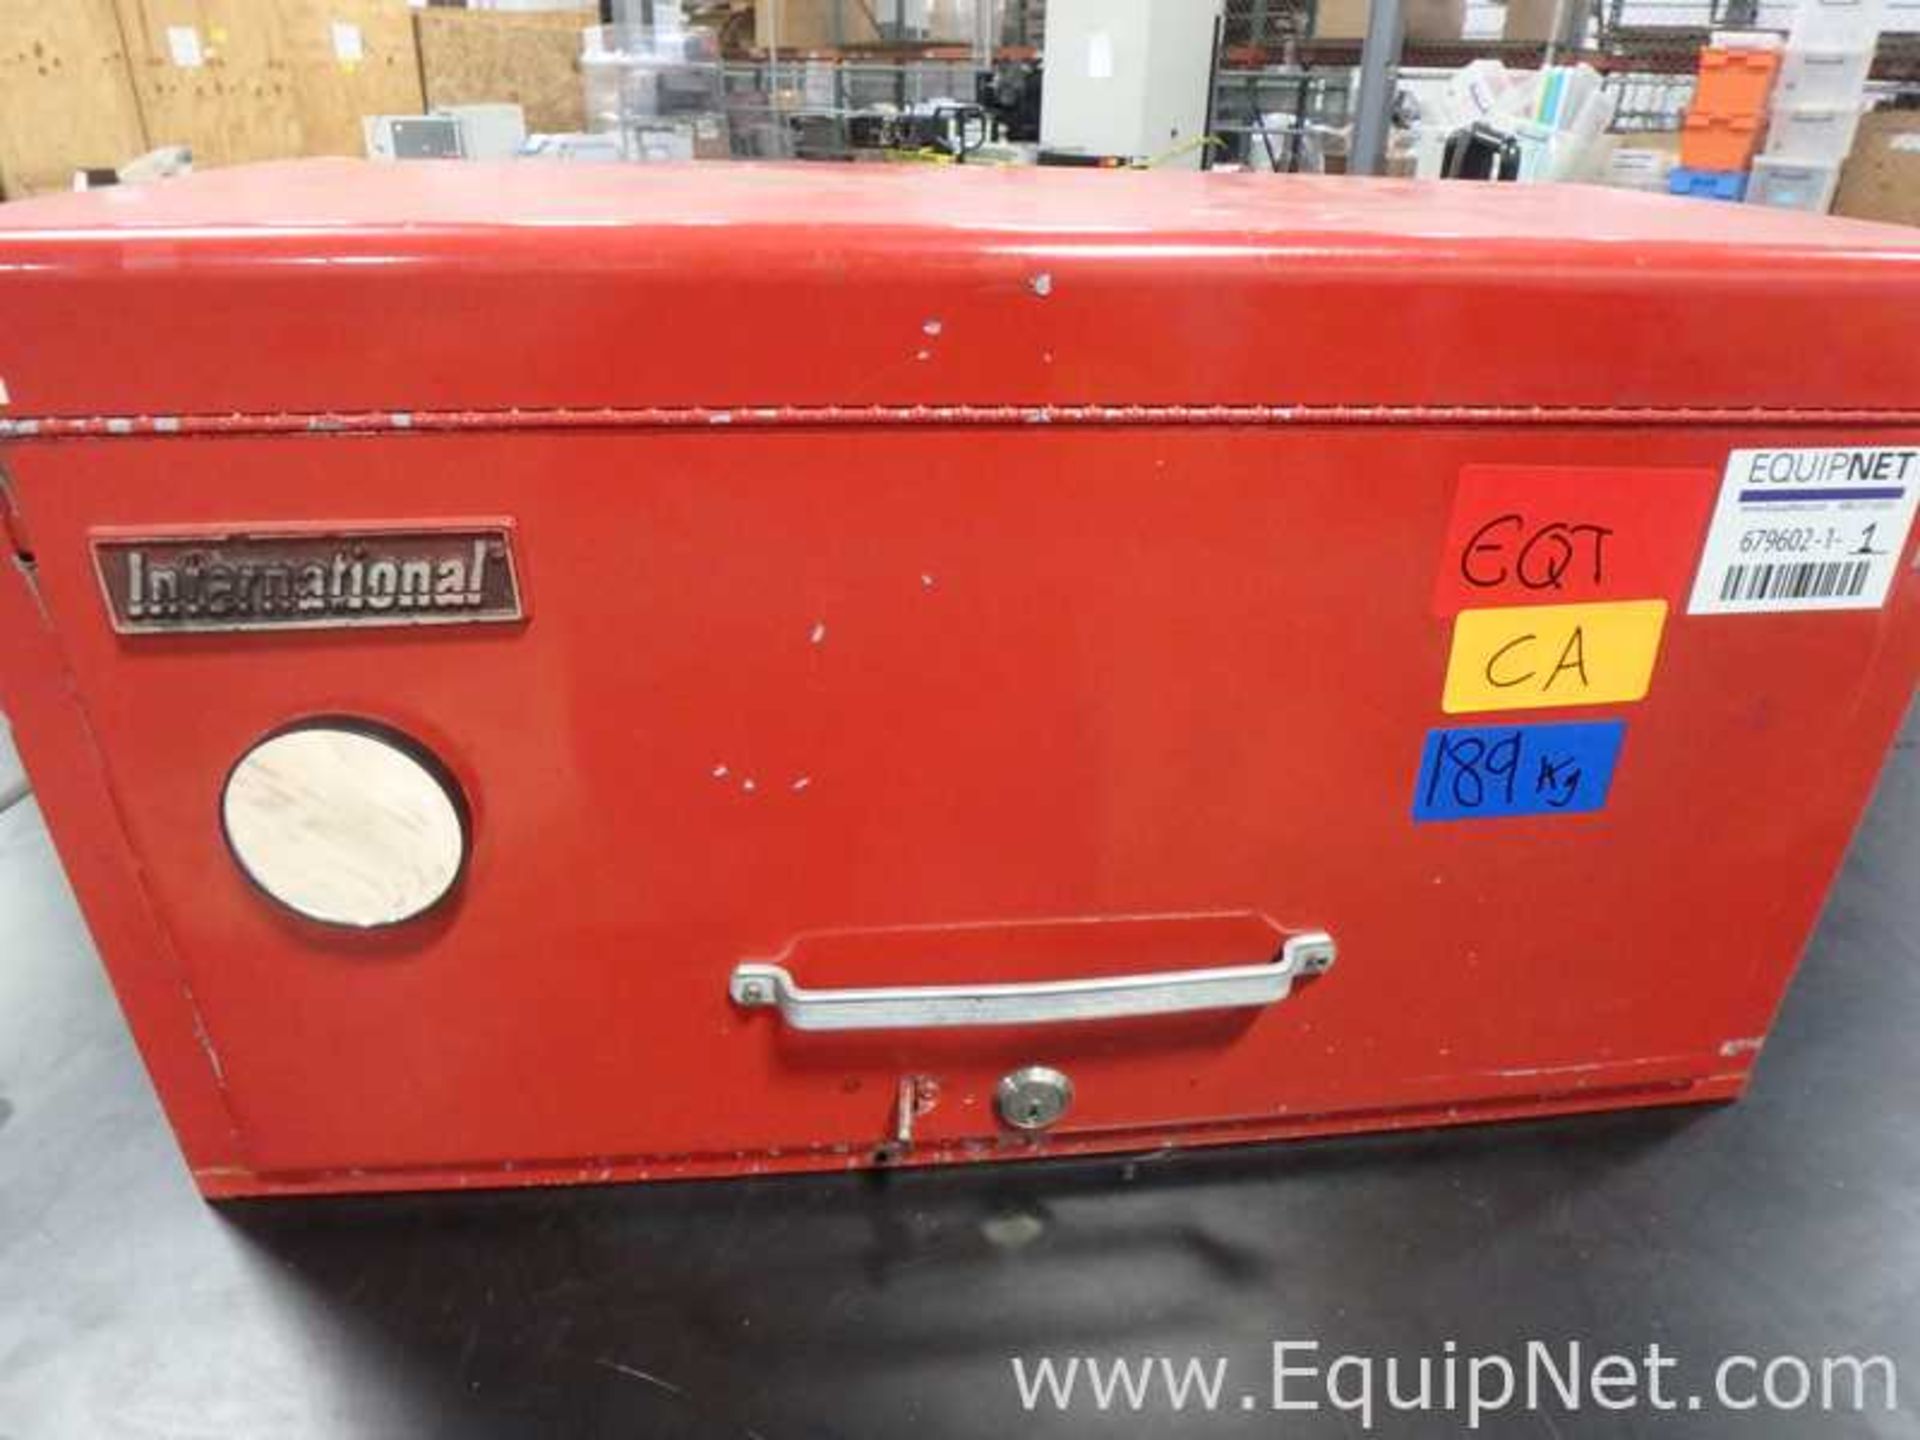 EQUIPNET LISTING #835371; REMOVAL COST: $15; DESCRIPTION: Tool Chest with Some ToolsSee Photos